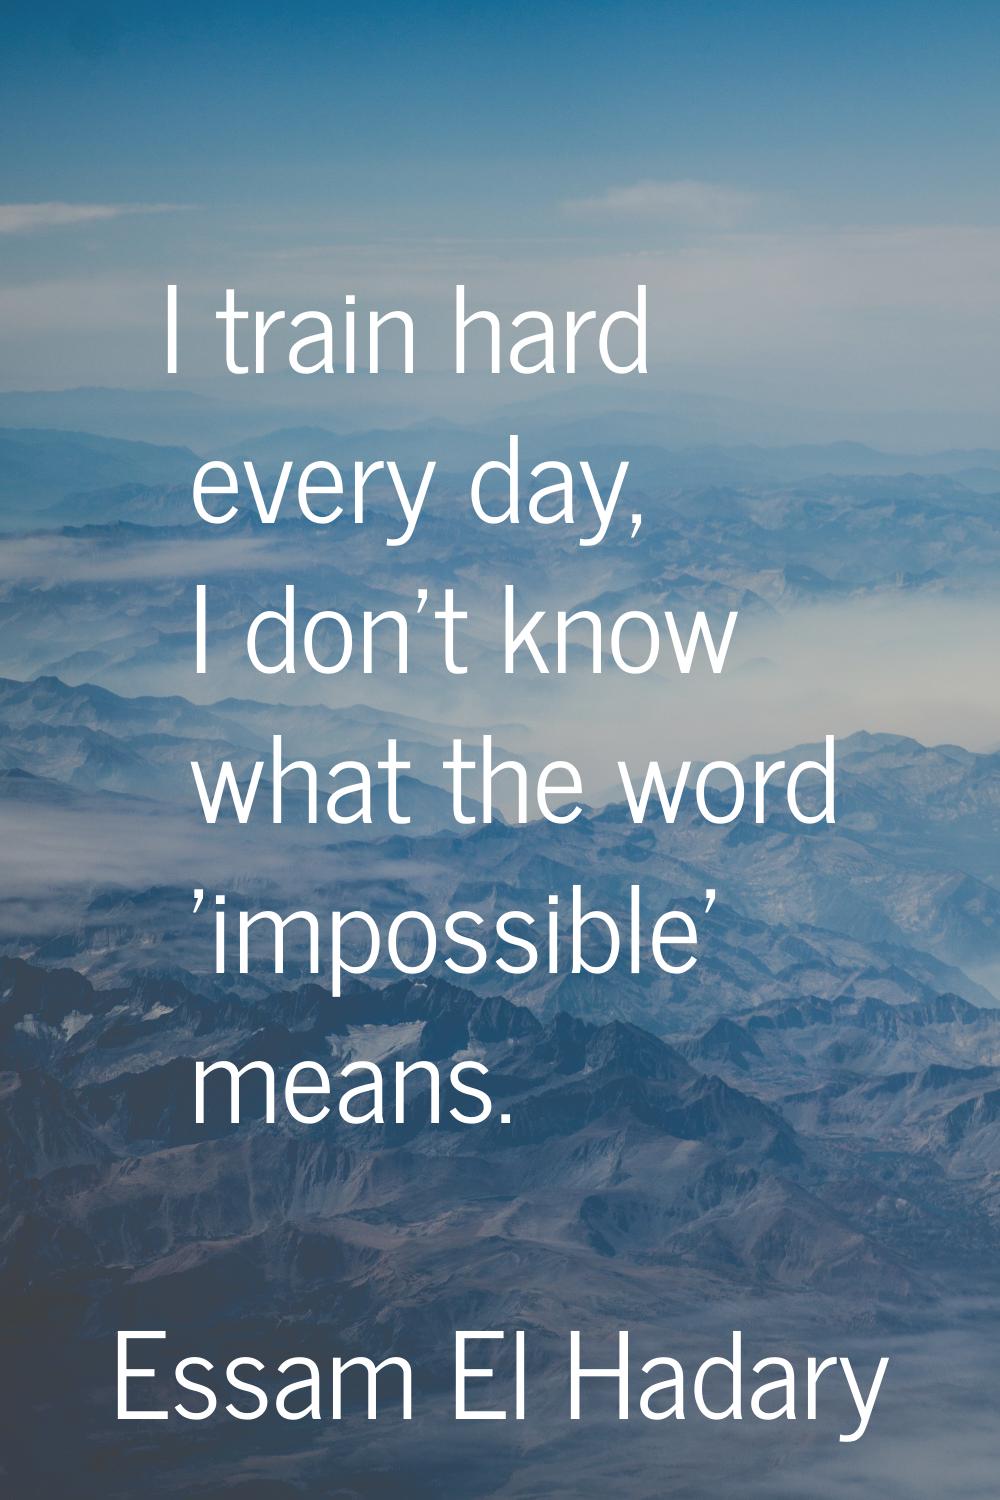 I train hard every day, I don't know what the word 'impossible' means.